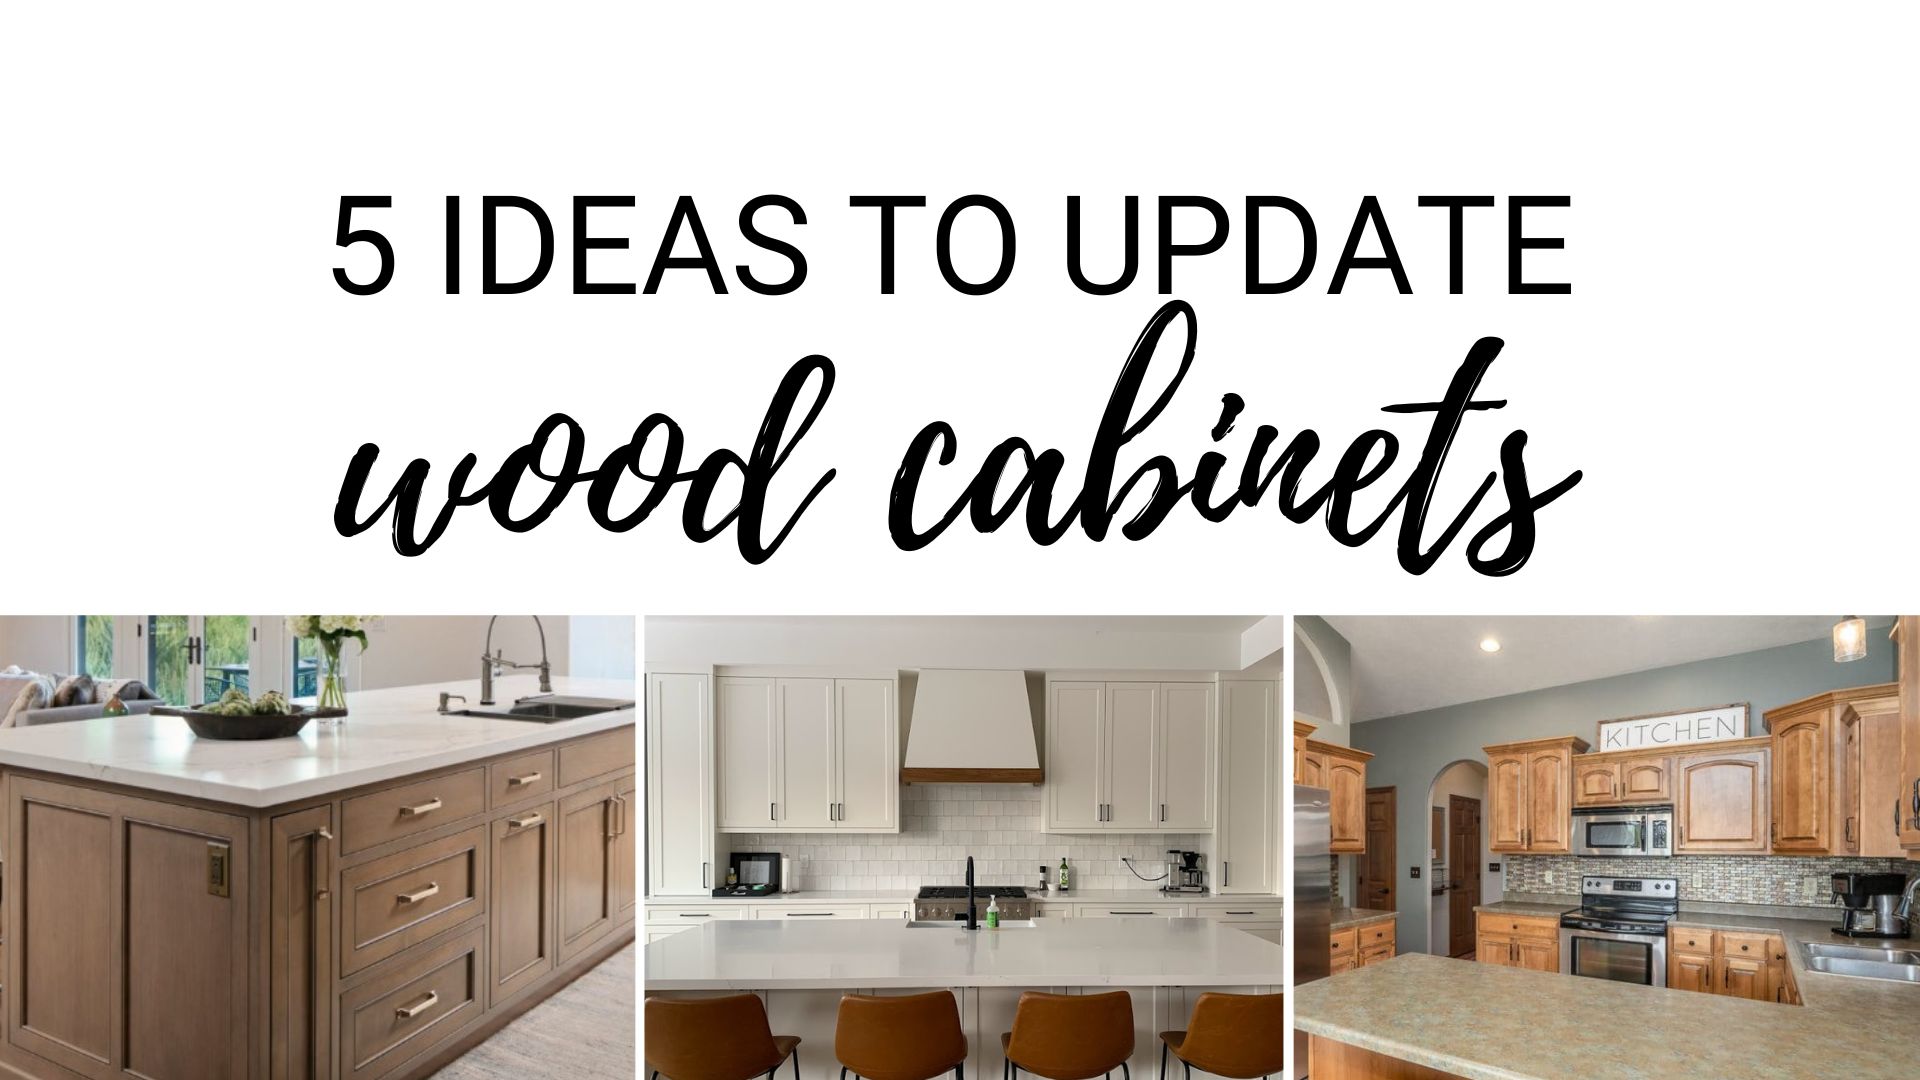 tips and ideas: how to update oak or wood cabinets: paint, stain